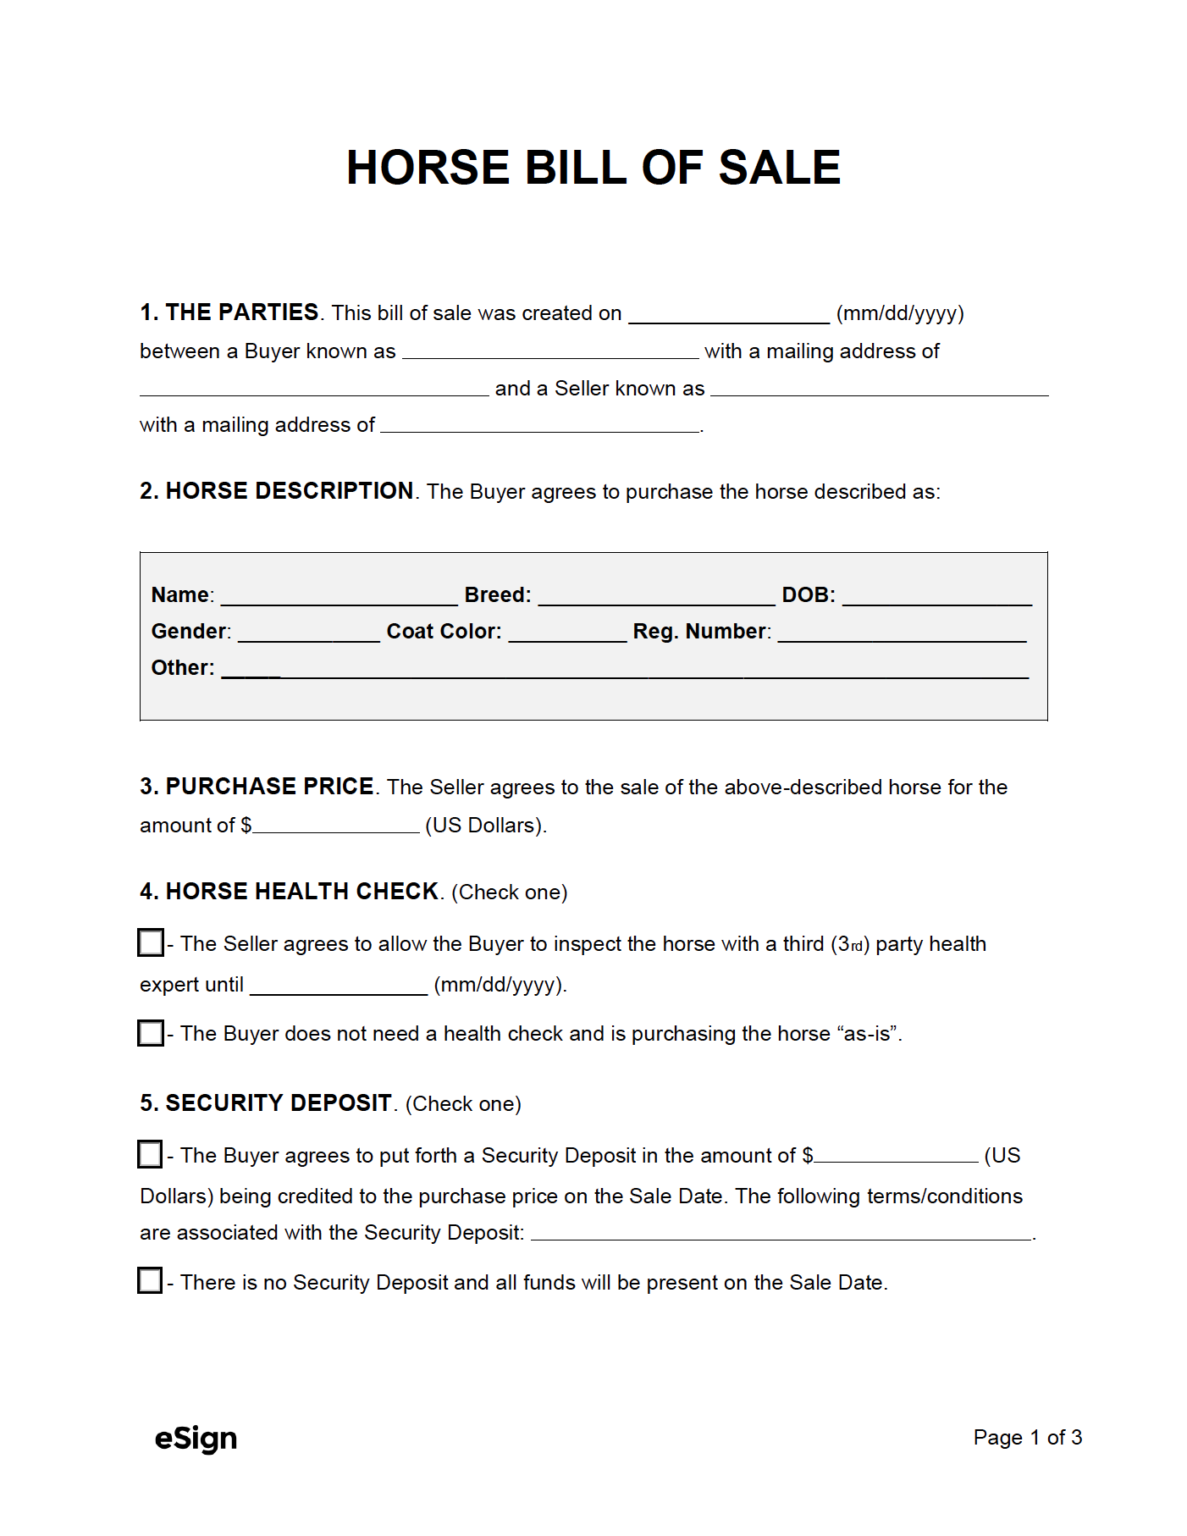 free-horse-bill-of-sale-form-pdf-word